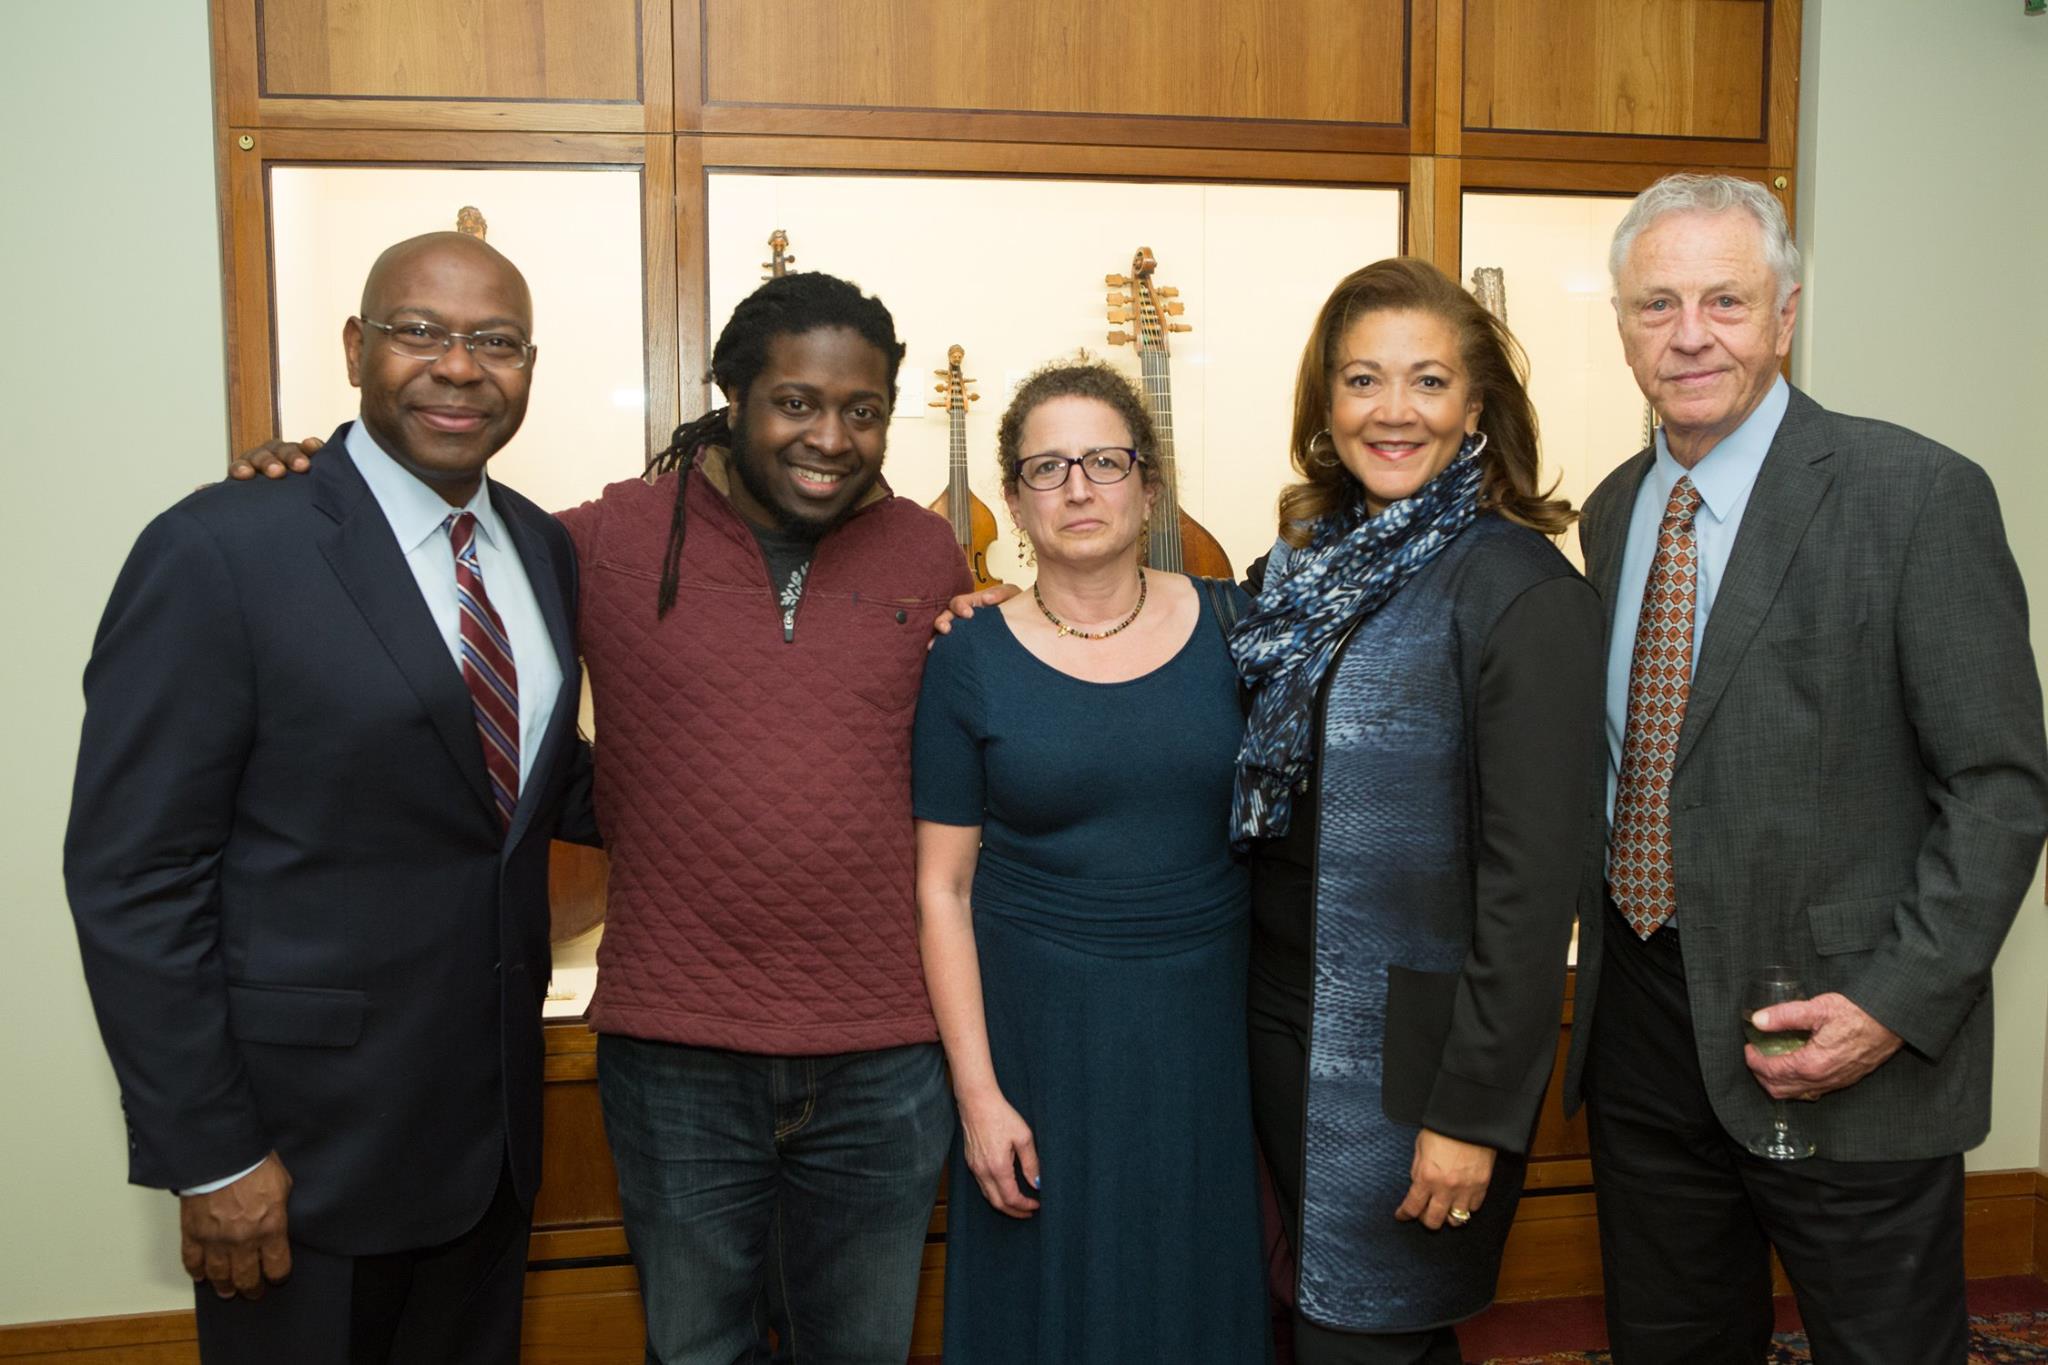 Jason Riley, Derrick Duplessy, Lesley student Marcia Walsh, Michele Norris and Morris Dees gather after the lecture.